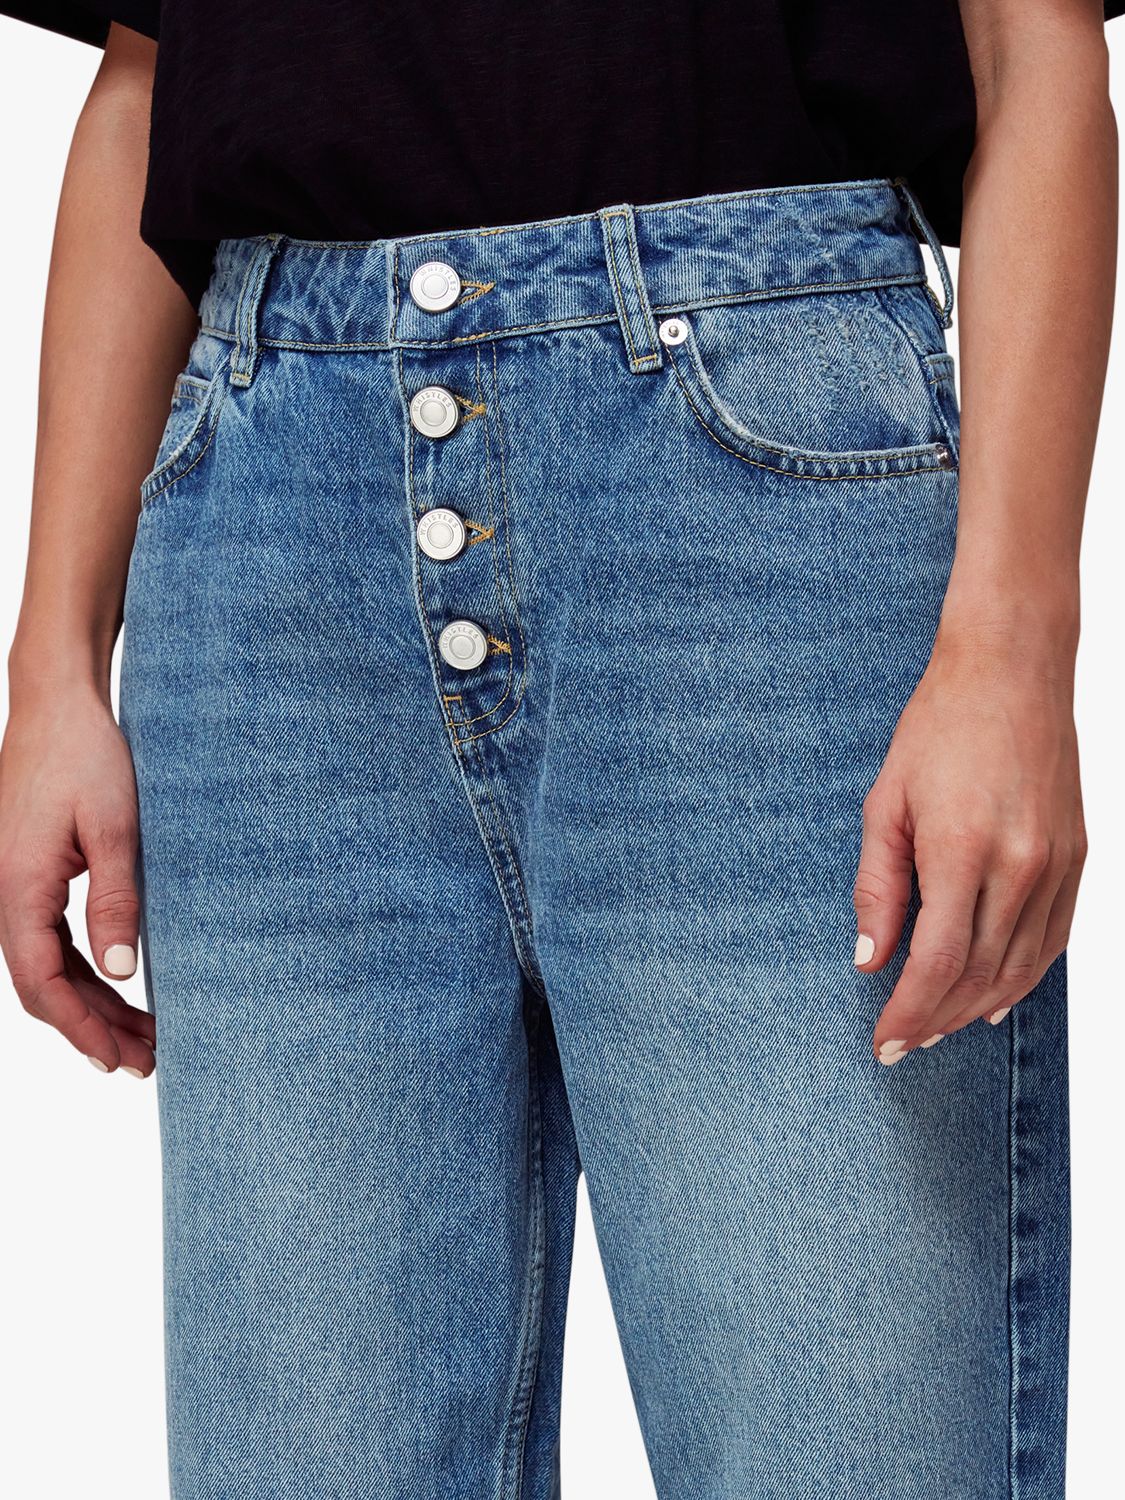 Whistles Petite Authentic Hollie Button Jeans, Blue at John Lewis ...